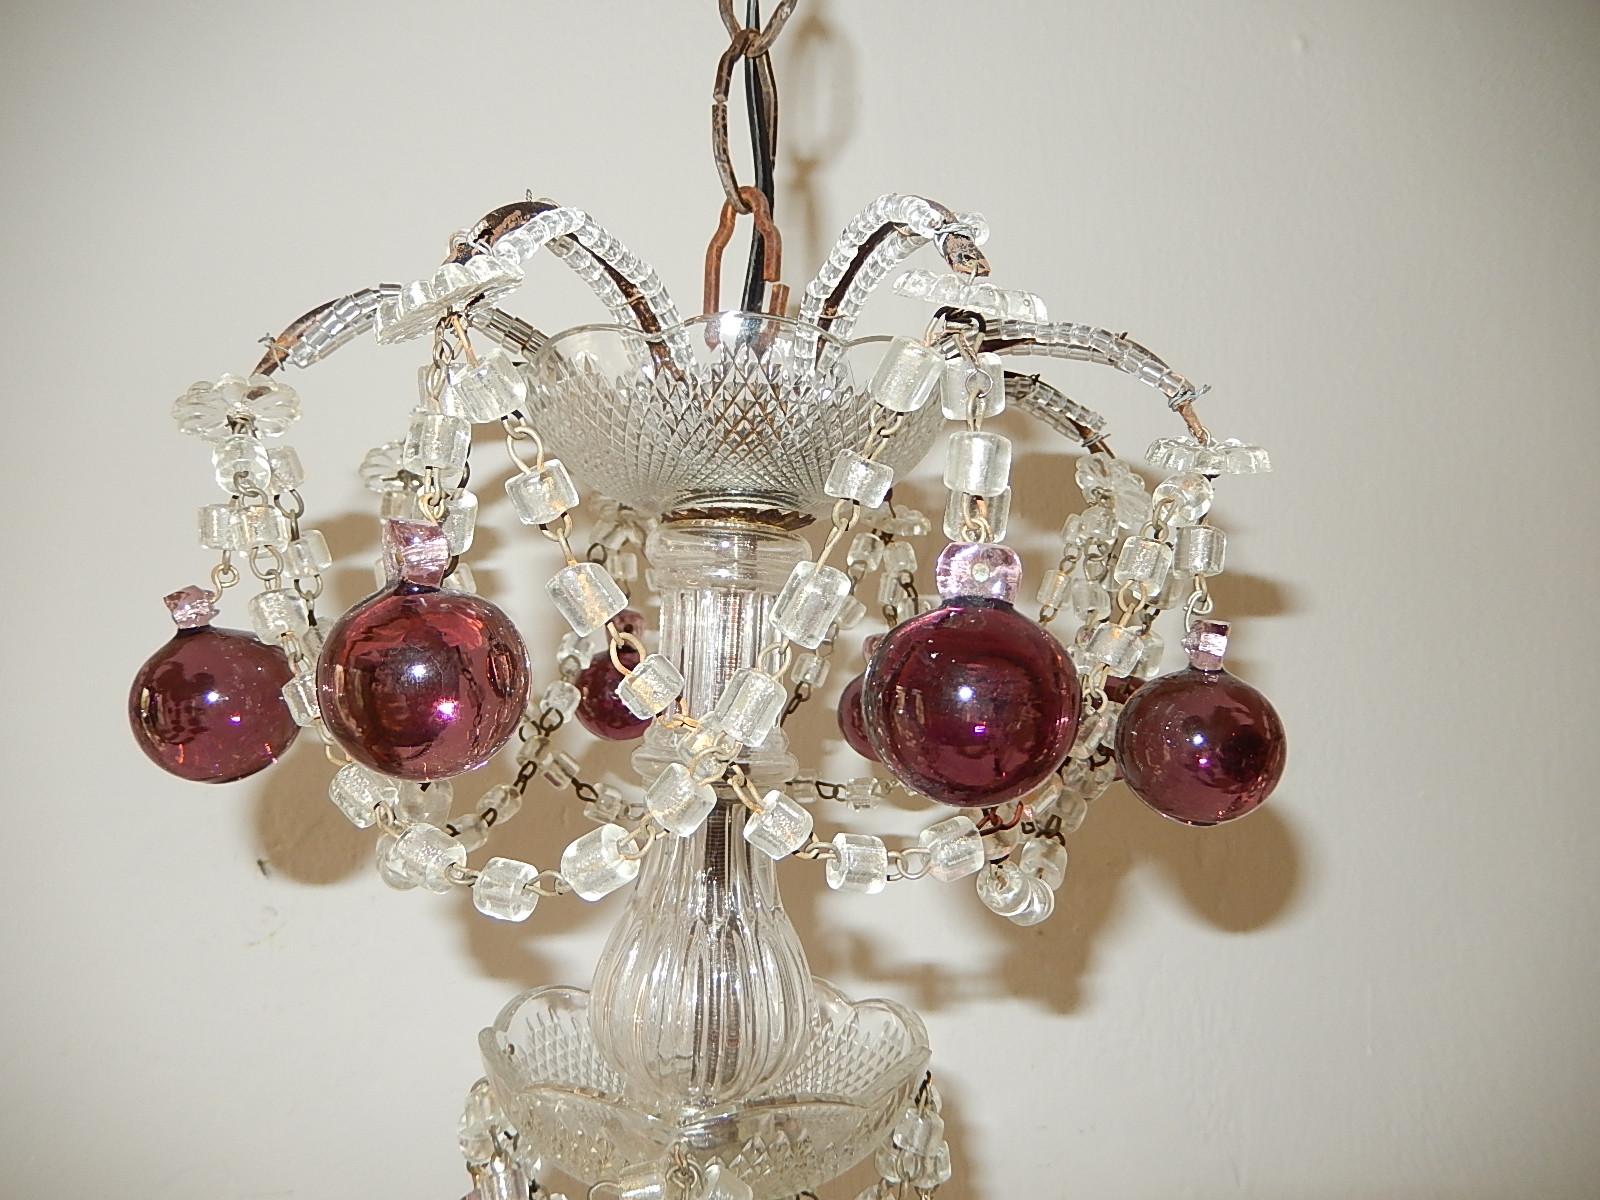 Housing 3 lights in center. Will be-wired with appropriate sockets for country and ready to hang. Murano blown center, top and bottom is completely beaded. Macaroni swags with Murano amethyst balls. Free priority UPS shipping from Italy with no